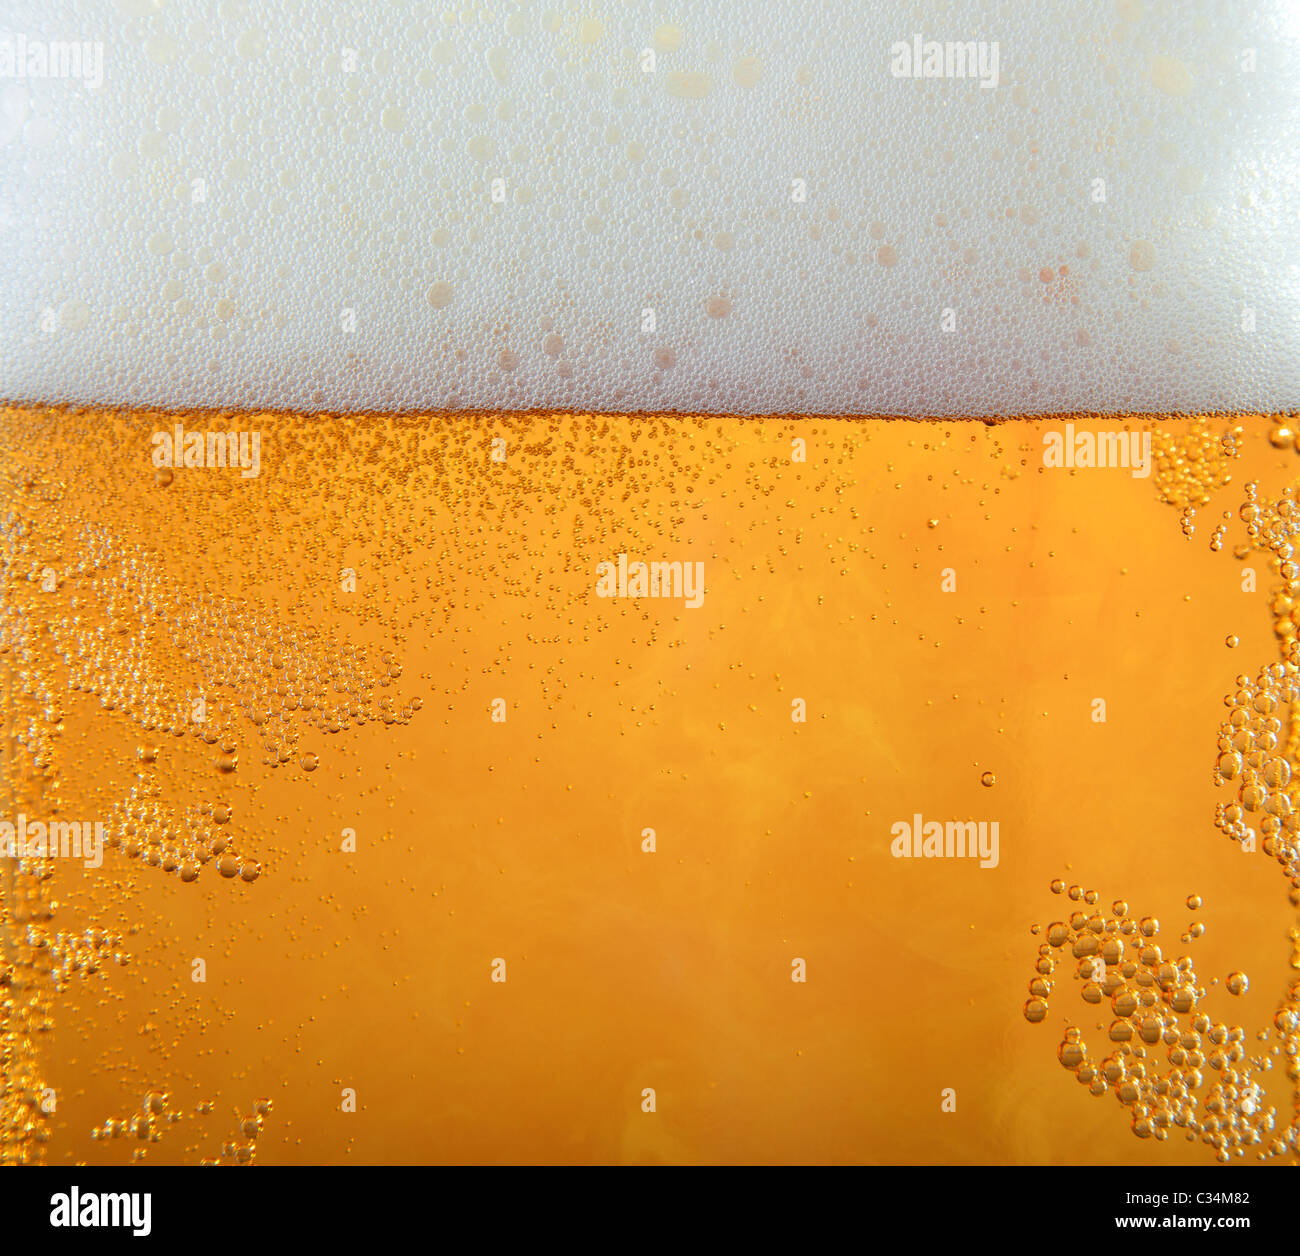 Beer in glass texture Stock Photo